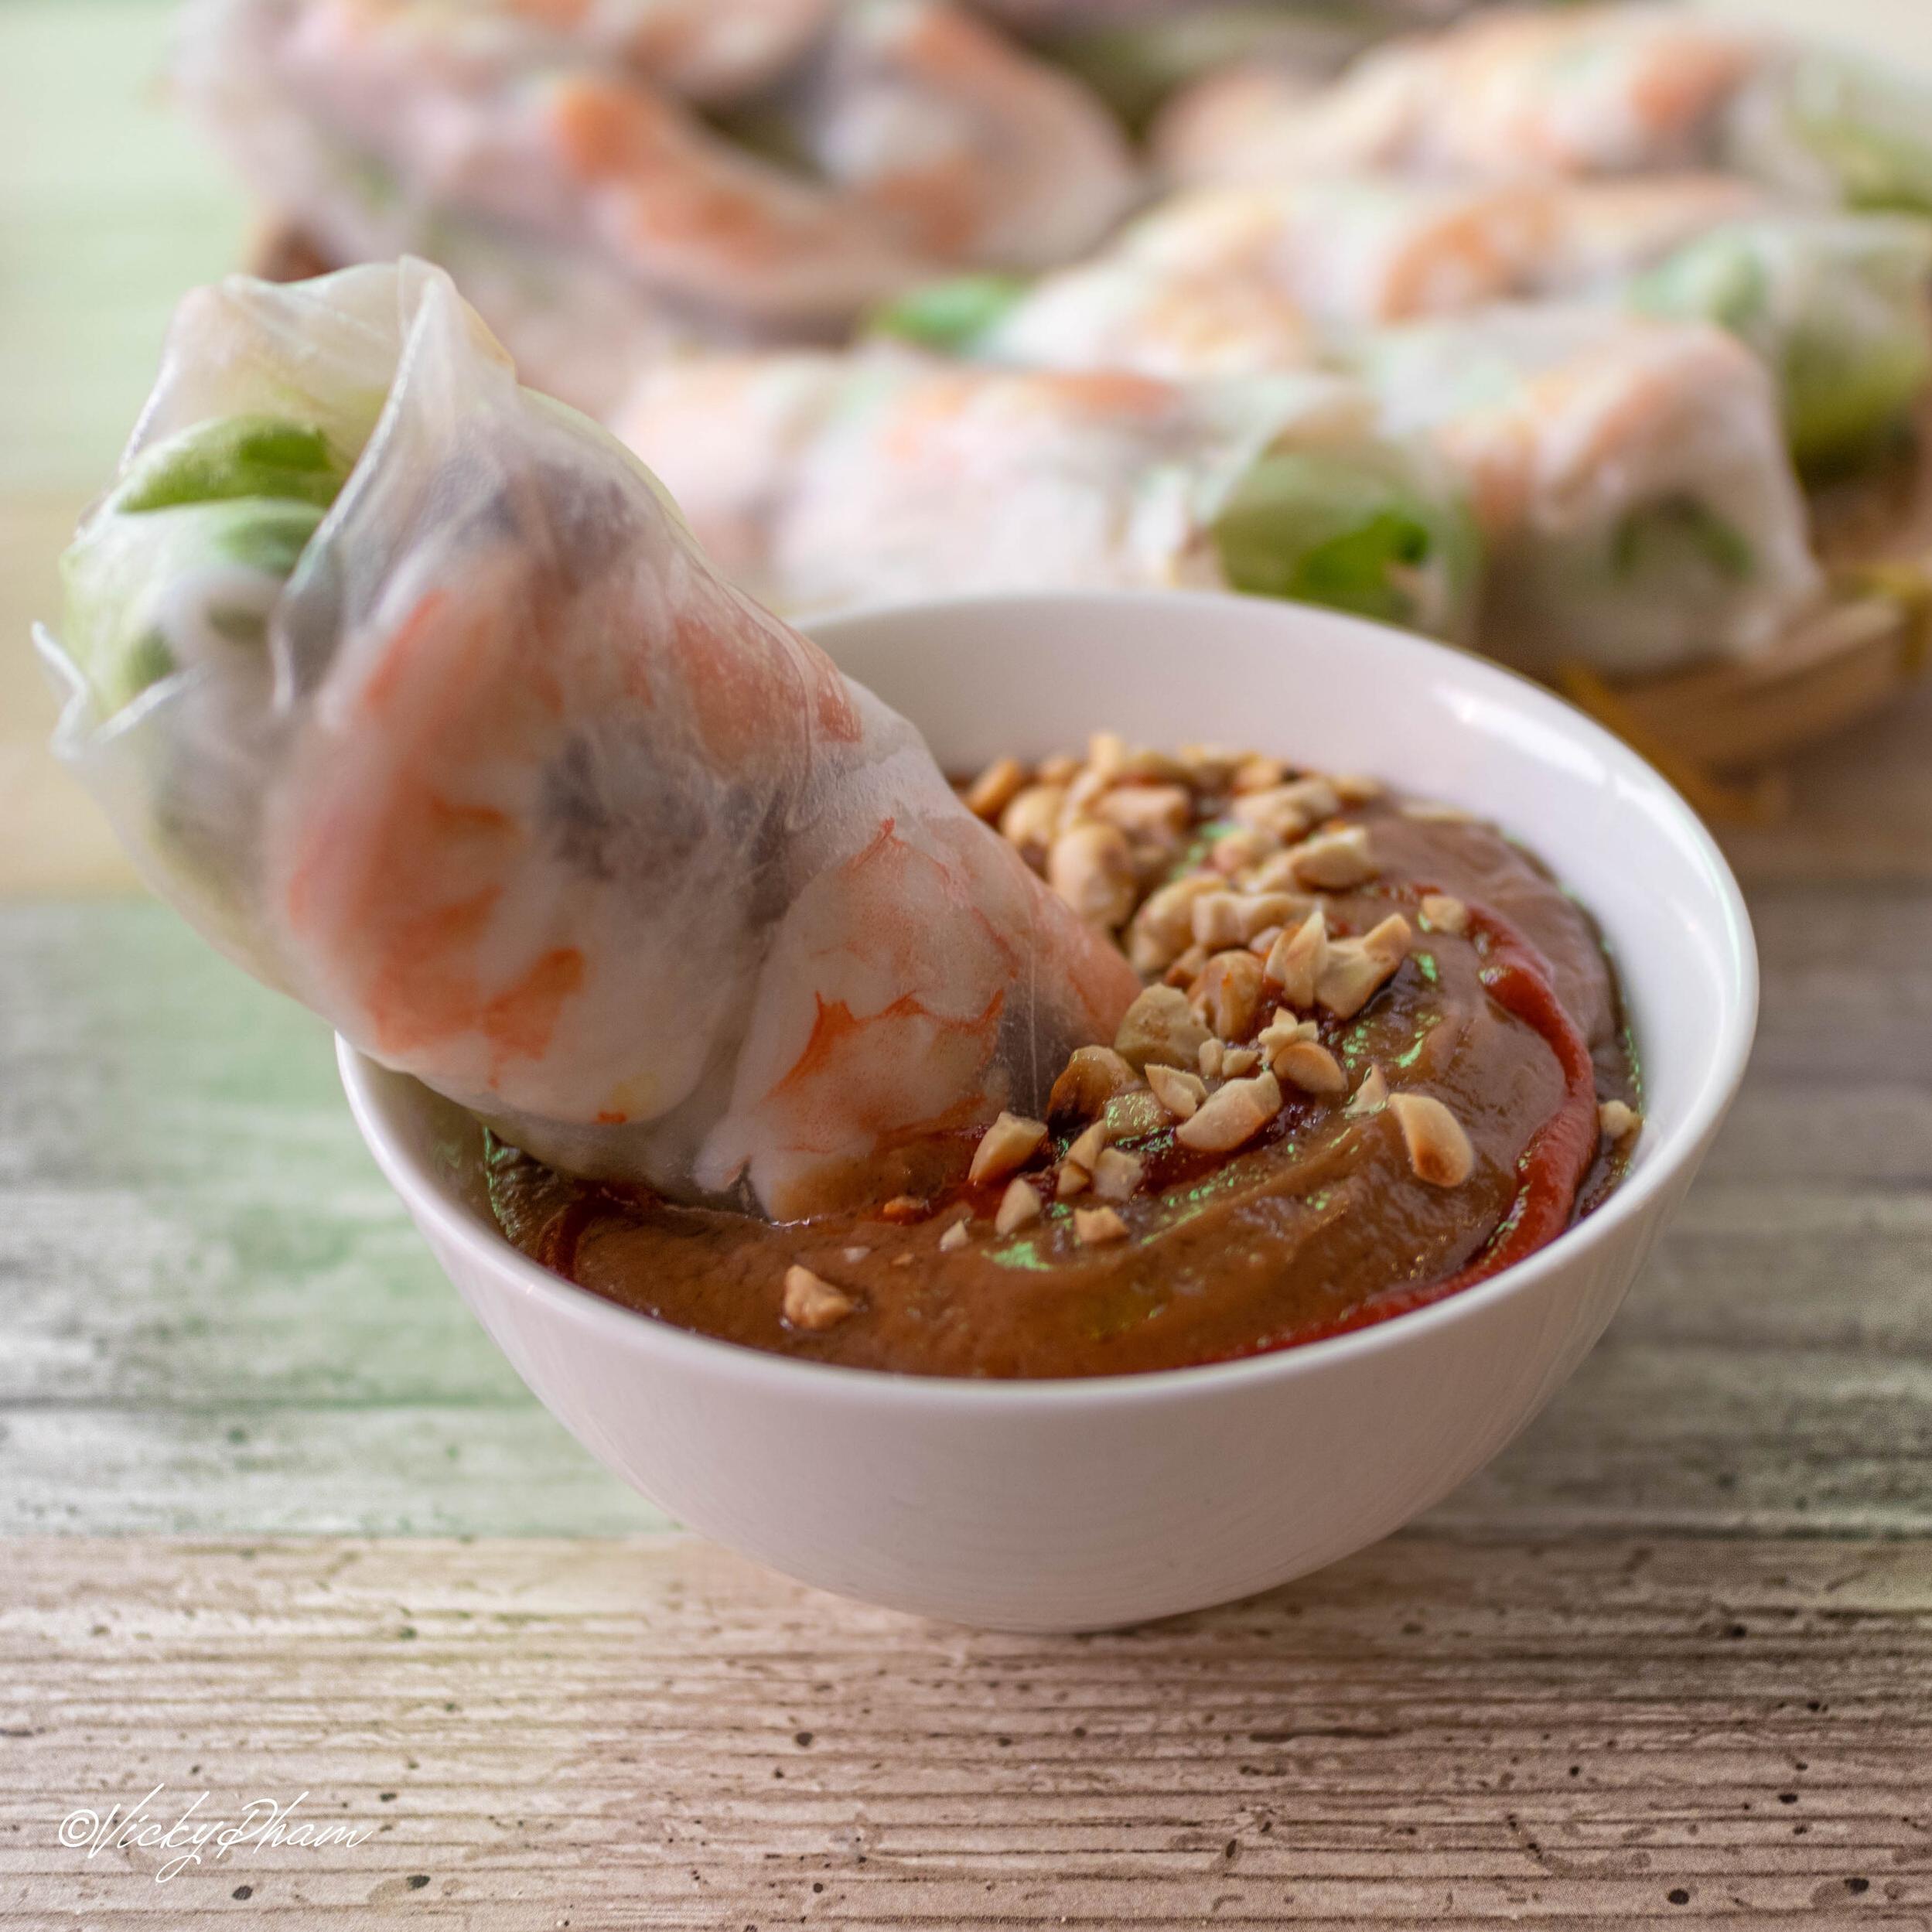 Peanut Dipping Sauce for Vietnamese Spring Roll